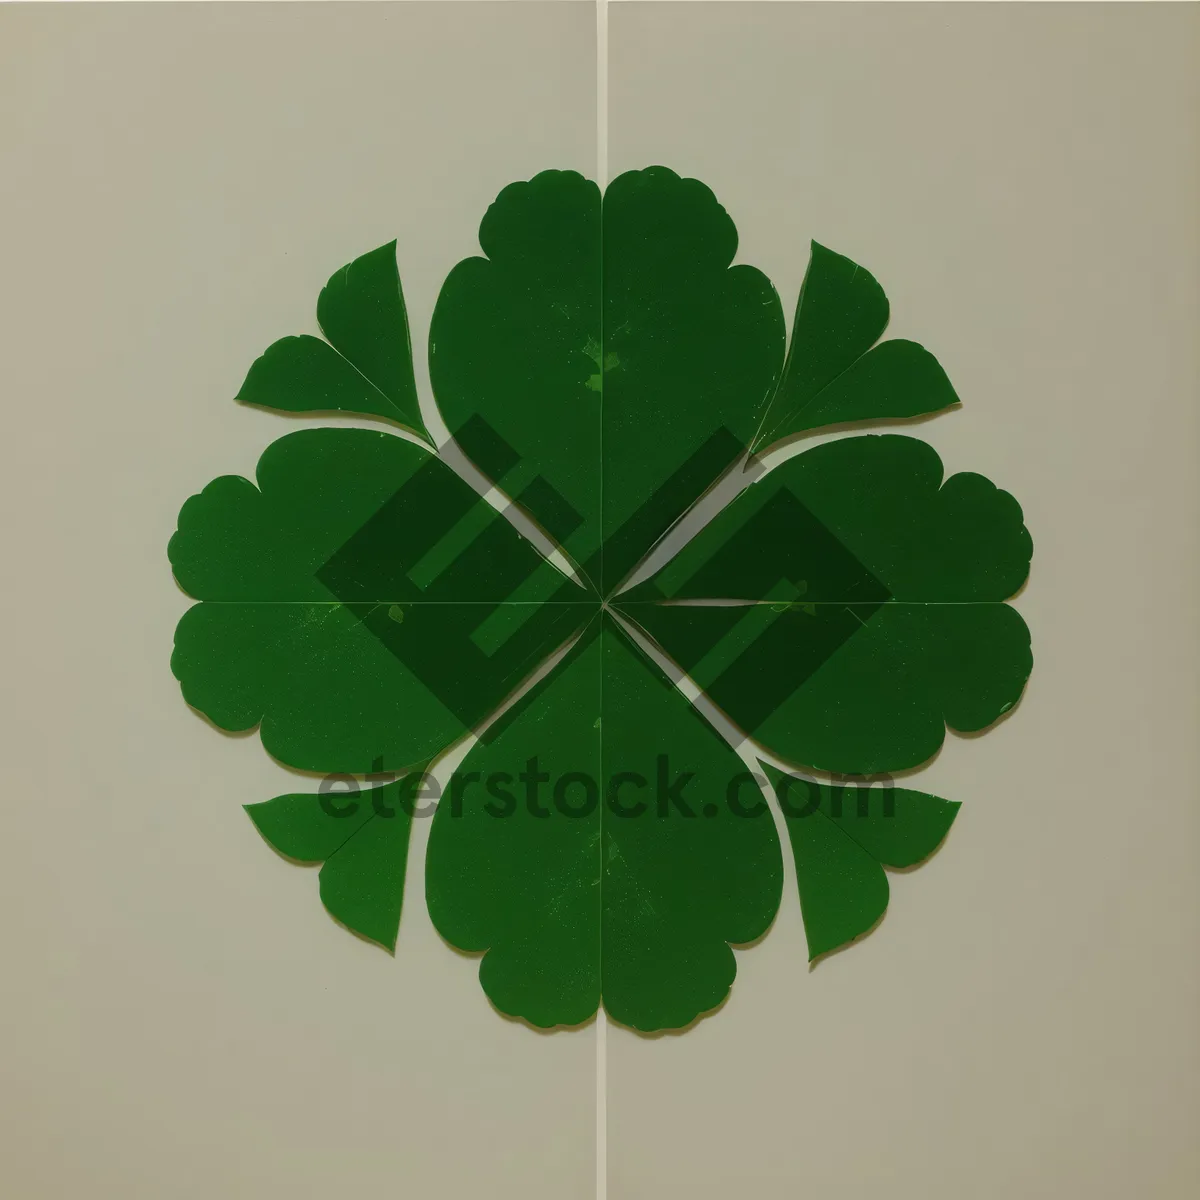 Picture of Lucky Clover Leaf Pattern Wallpaper Design